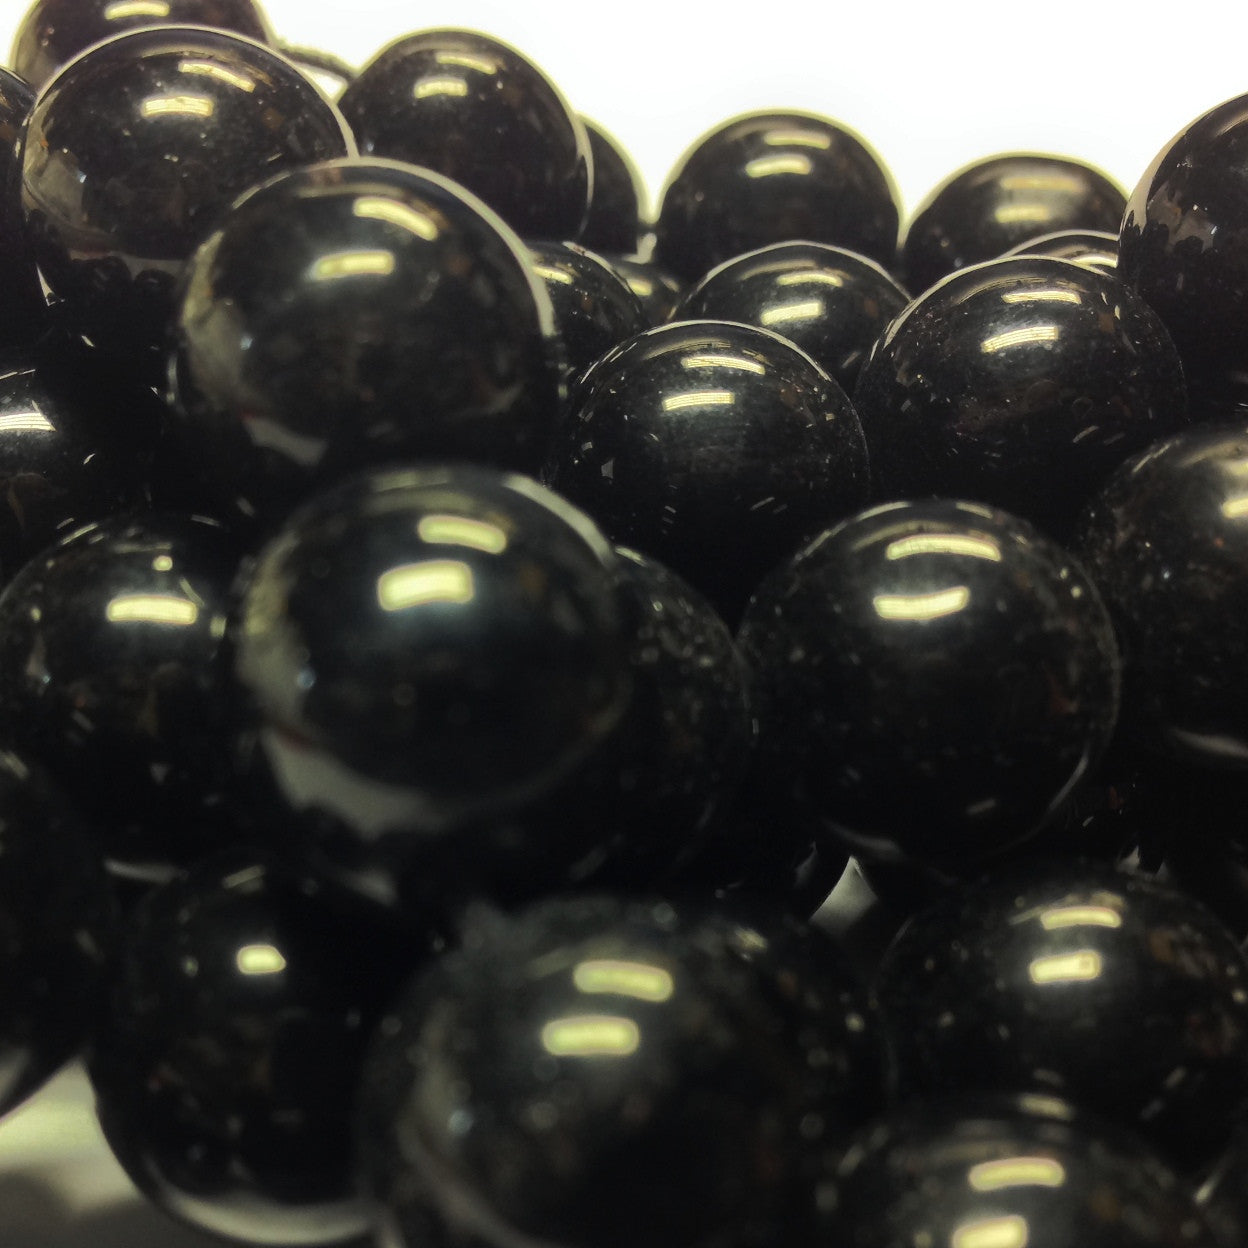 12MM Black Round Glass Beads (100 pieces)